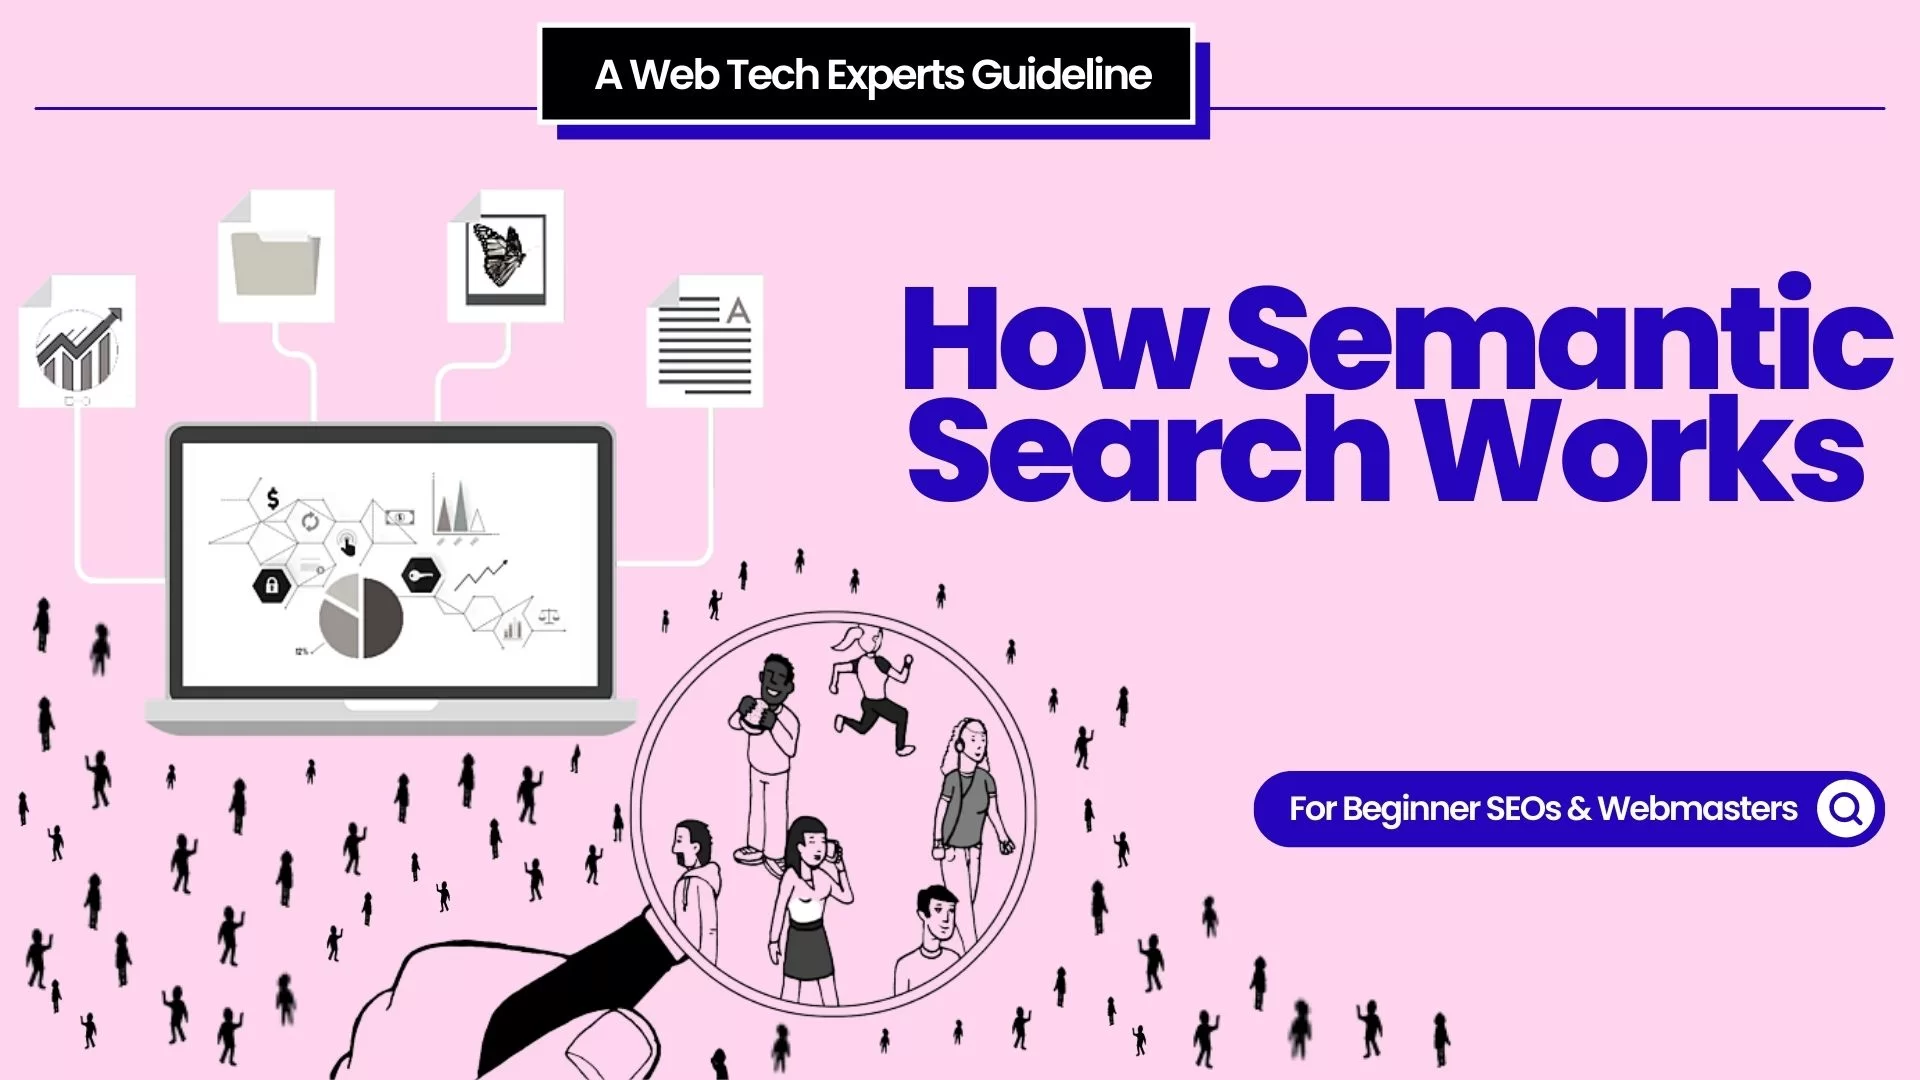 What Is Semantic Search?